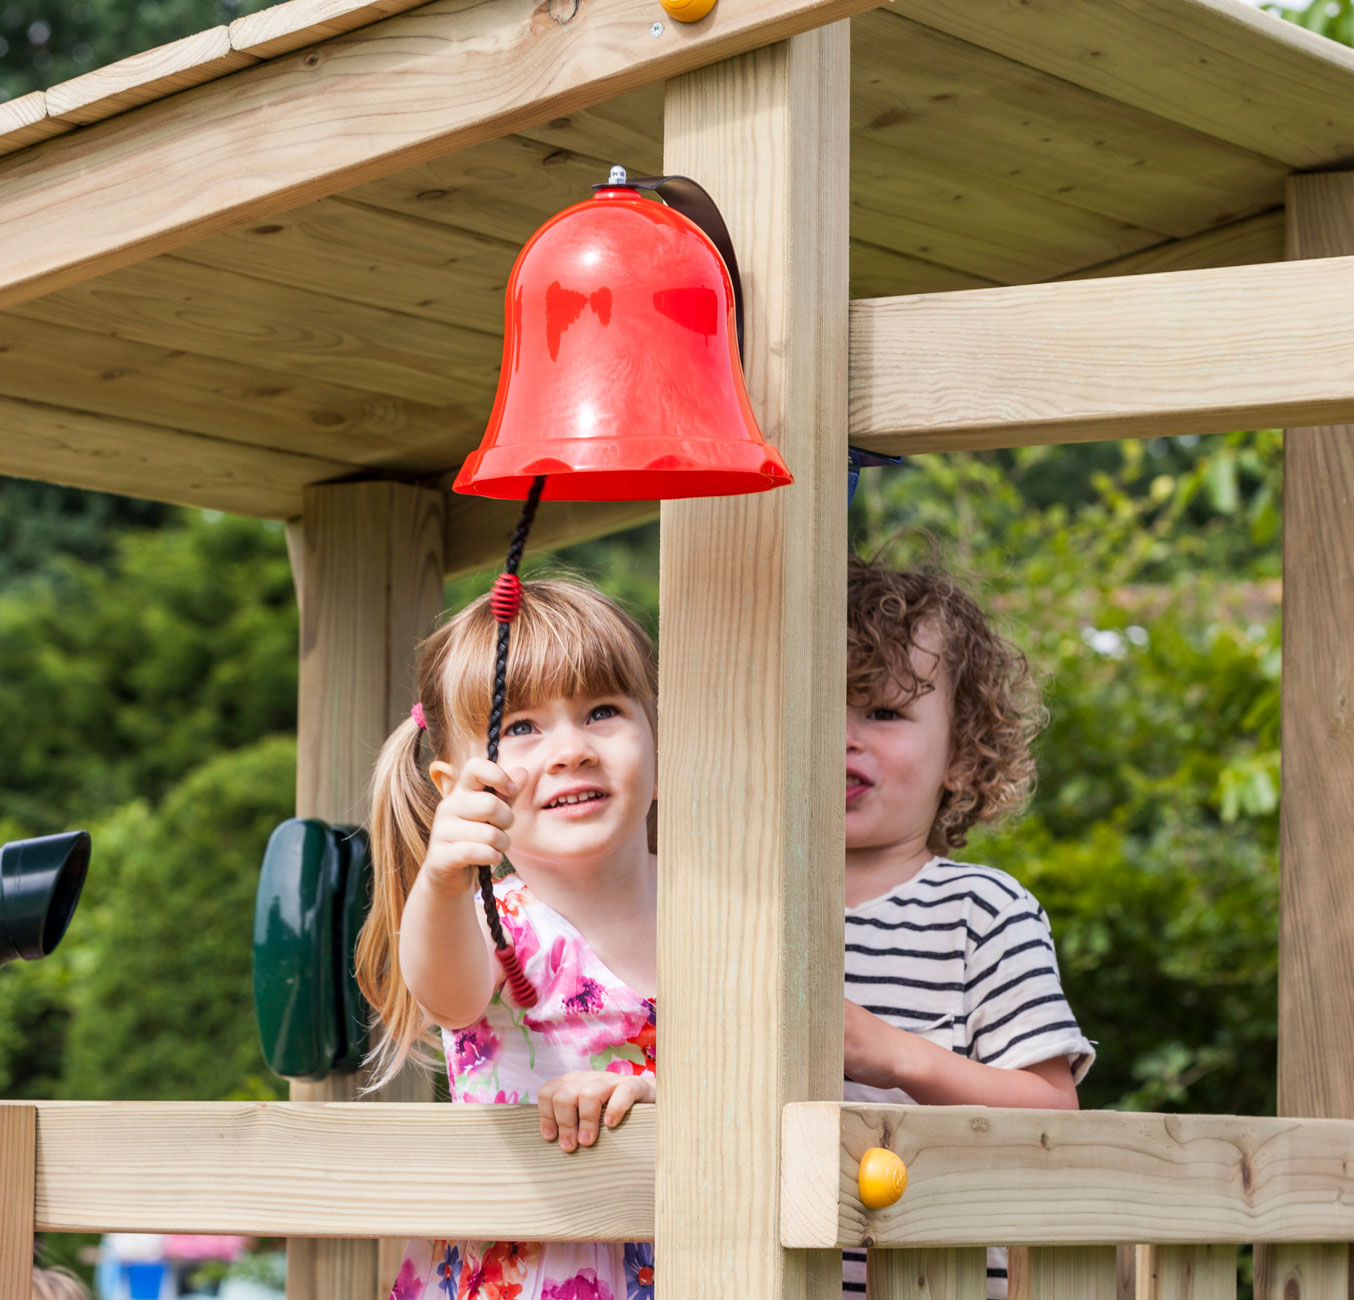 How Can a Playground Help Your Child’s Development?